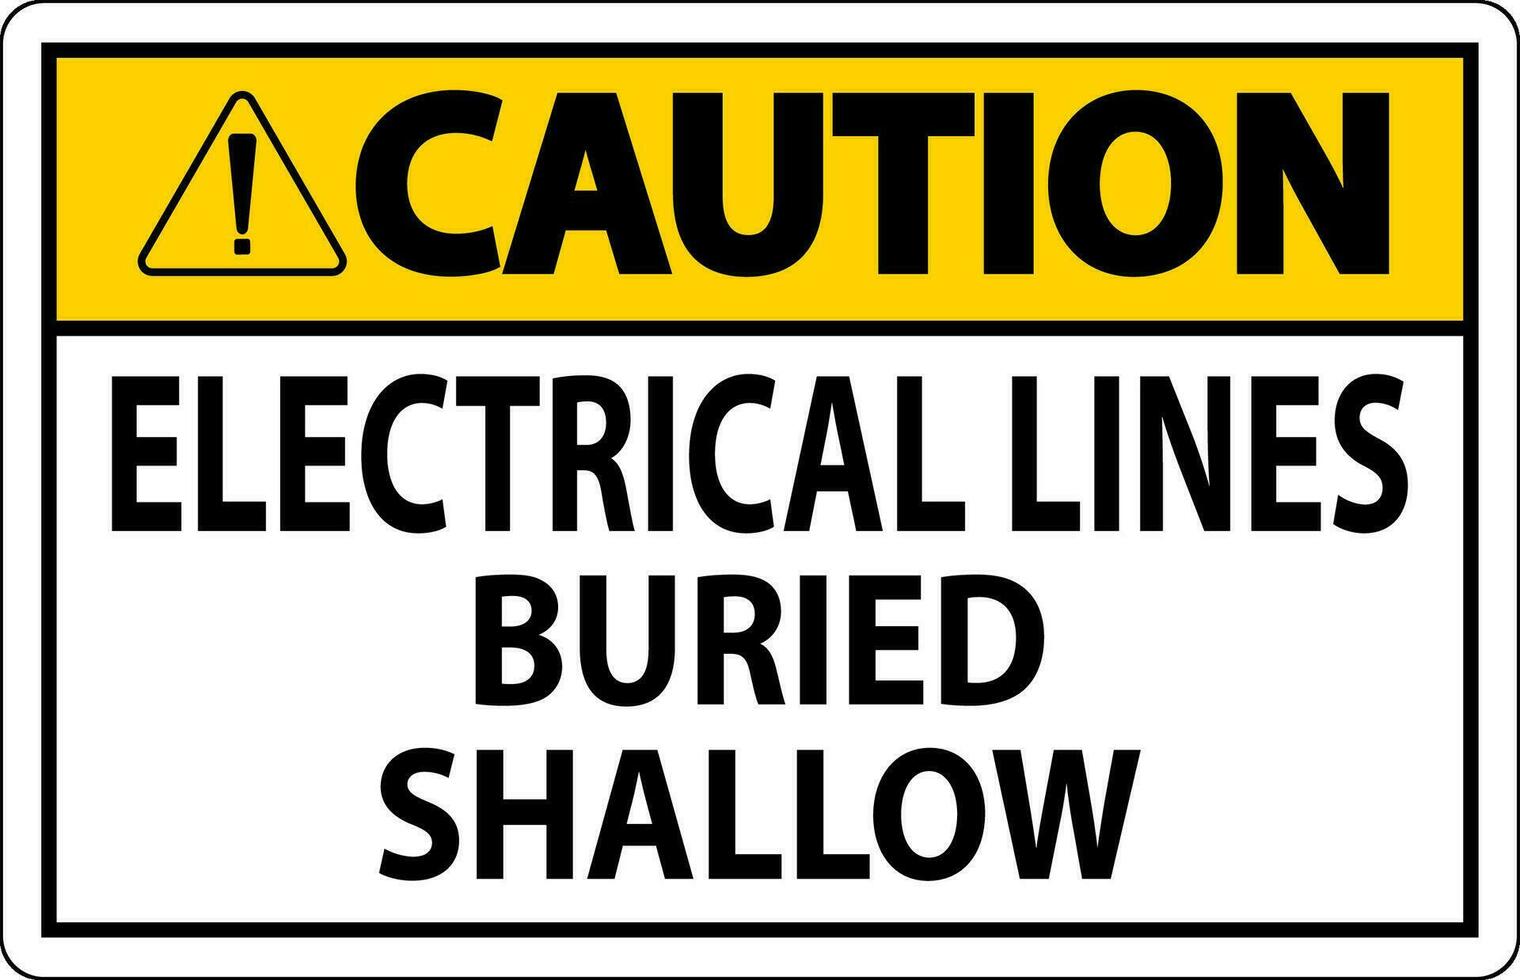 Caution Sign Electrical Lines, Buried Shallow On White Bacground vector